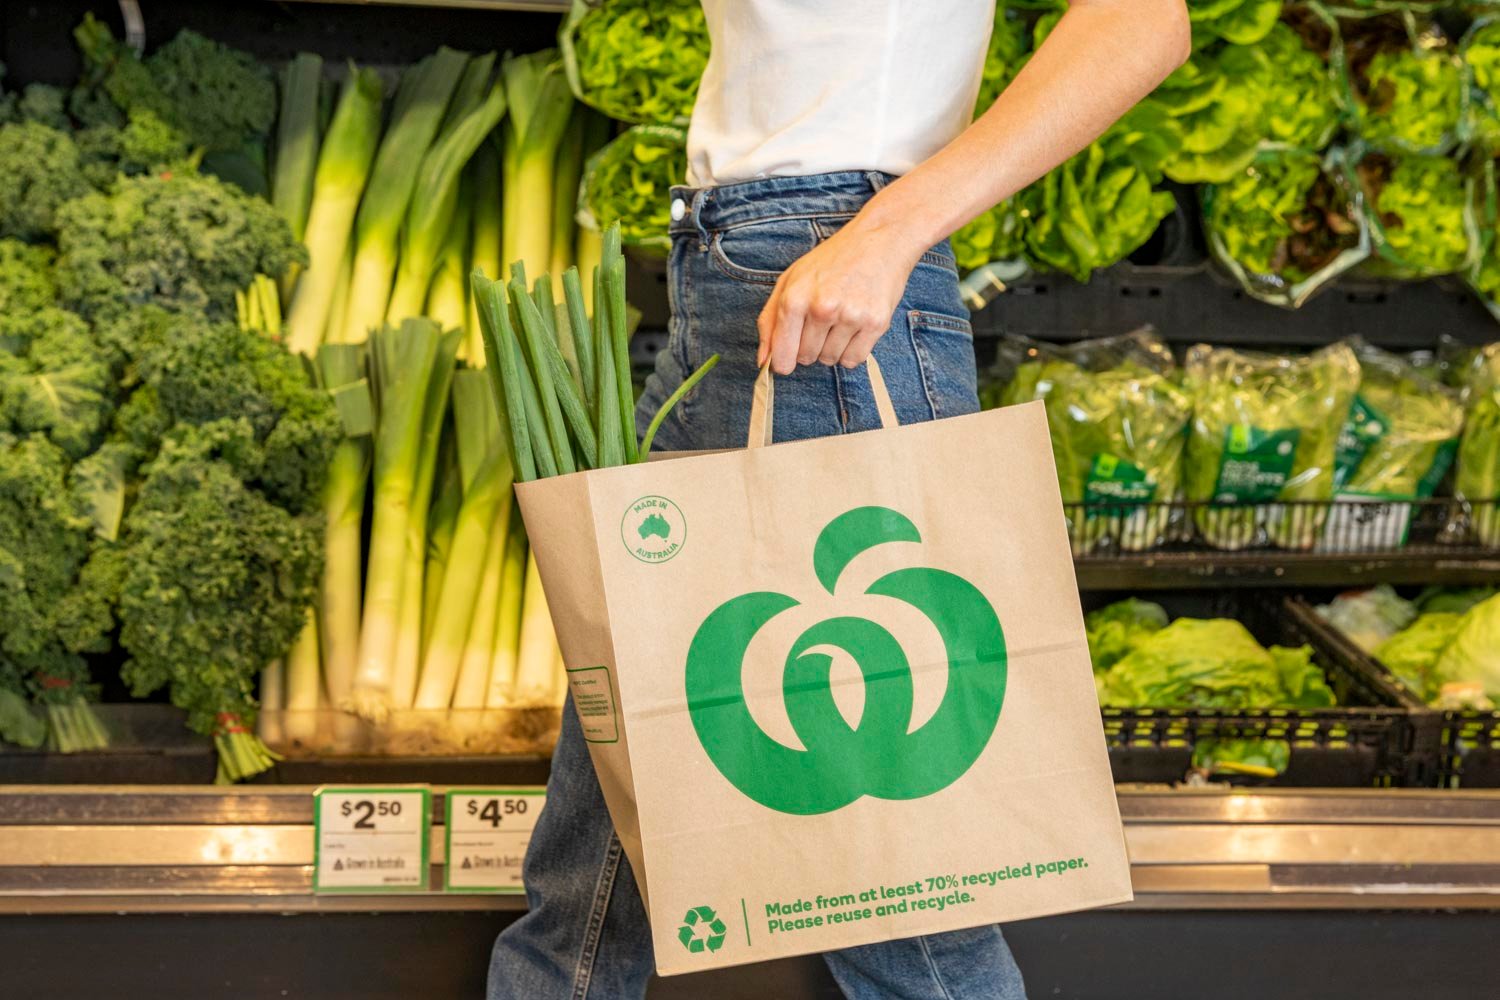 Aggregate more than 57 woolworths bags best - esthdonghoadian